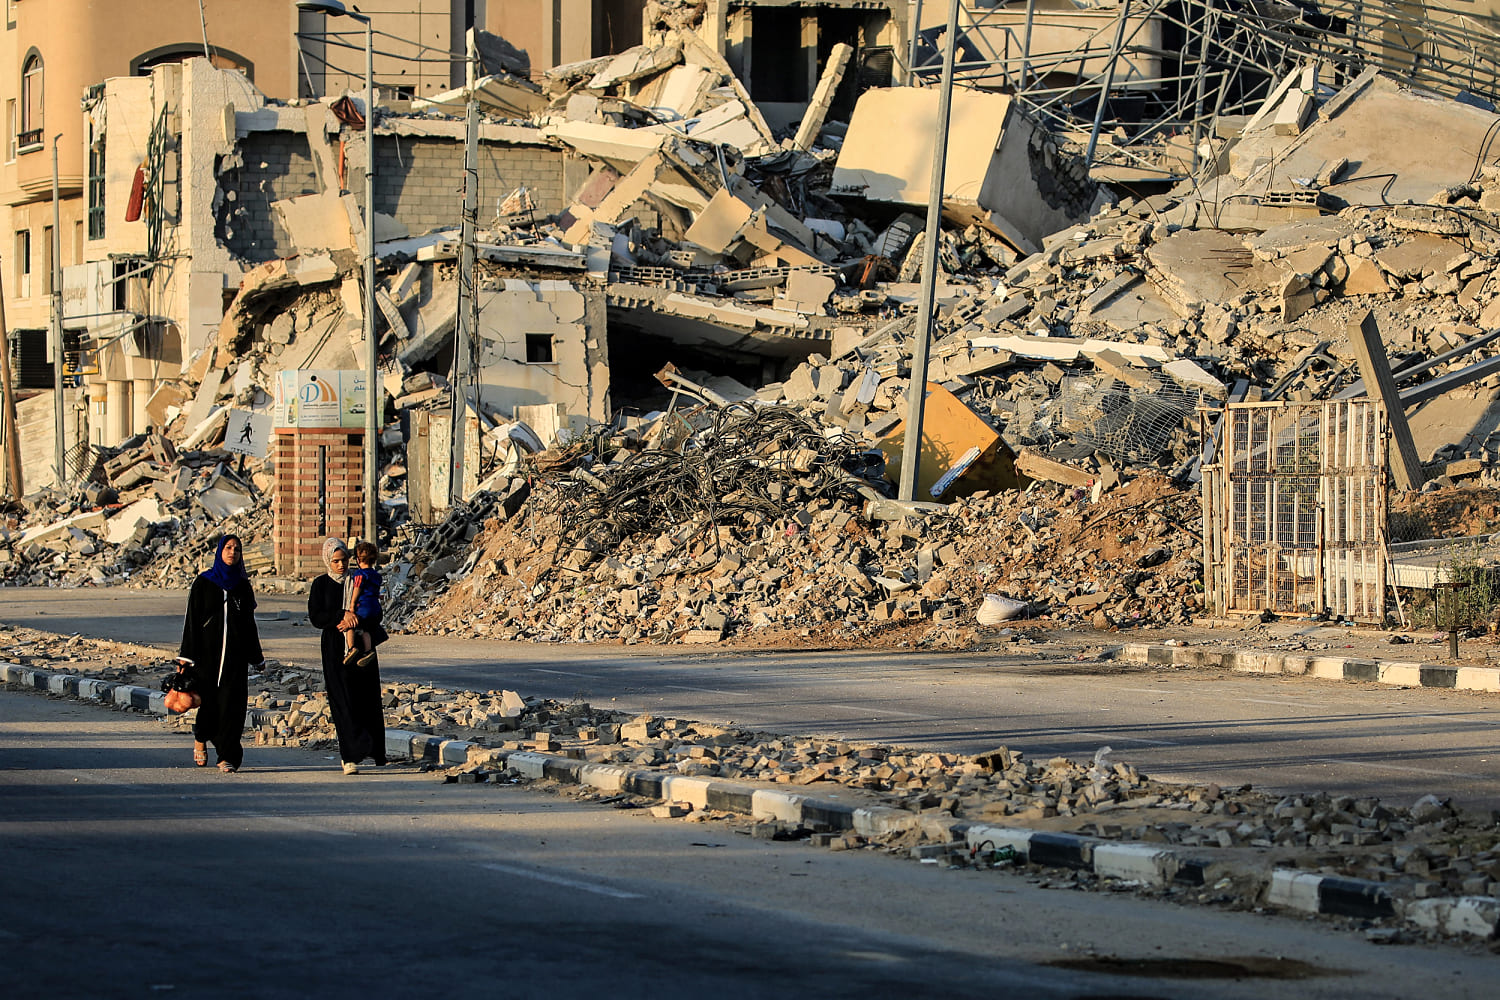 Israeli government sparks outcry with videos saying 'there are no innocent civilians' in Gaza